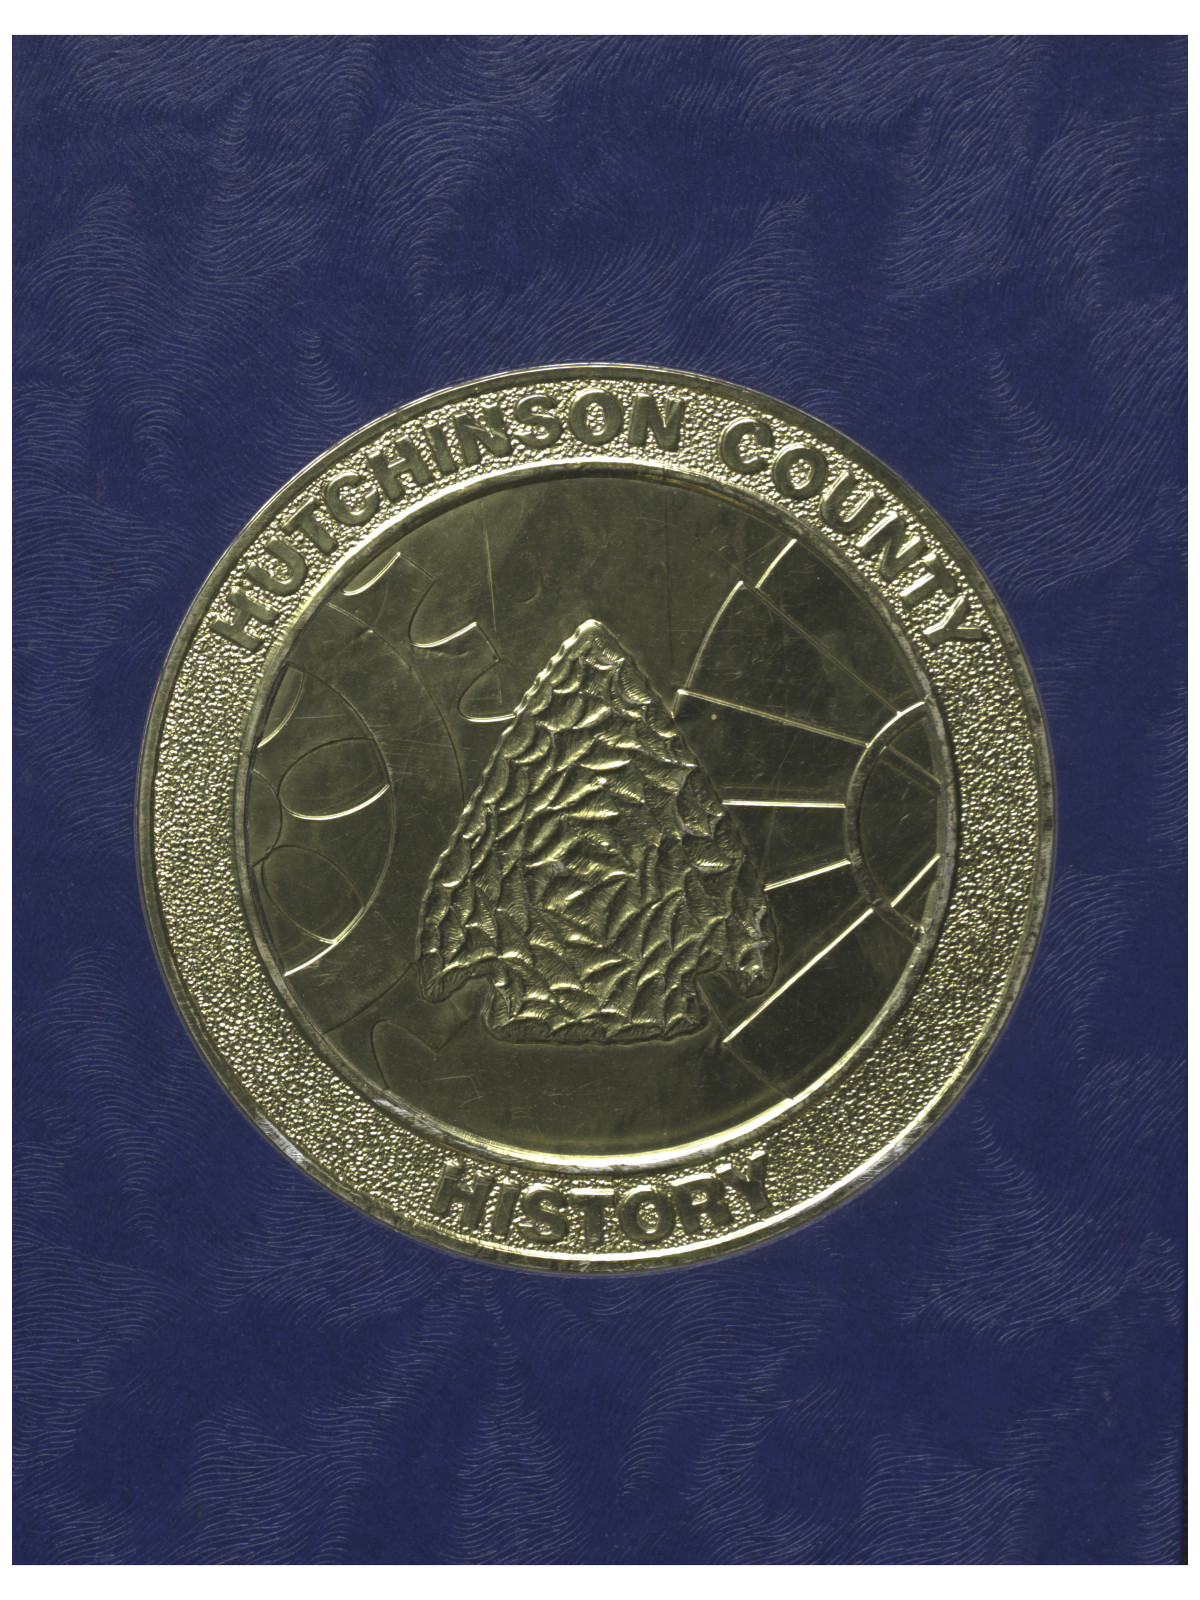 History of Hutchinson County, Texas: 104 Years, 1876-1980
                                                
                                                    [Sequence #]: 1 of 526
                                                